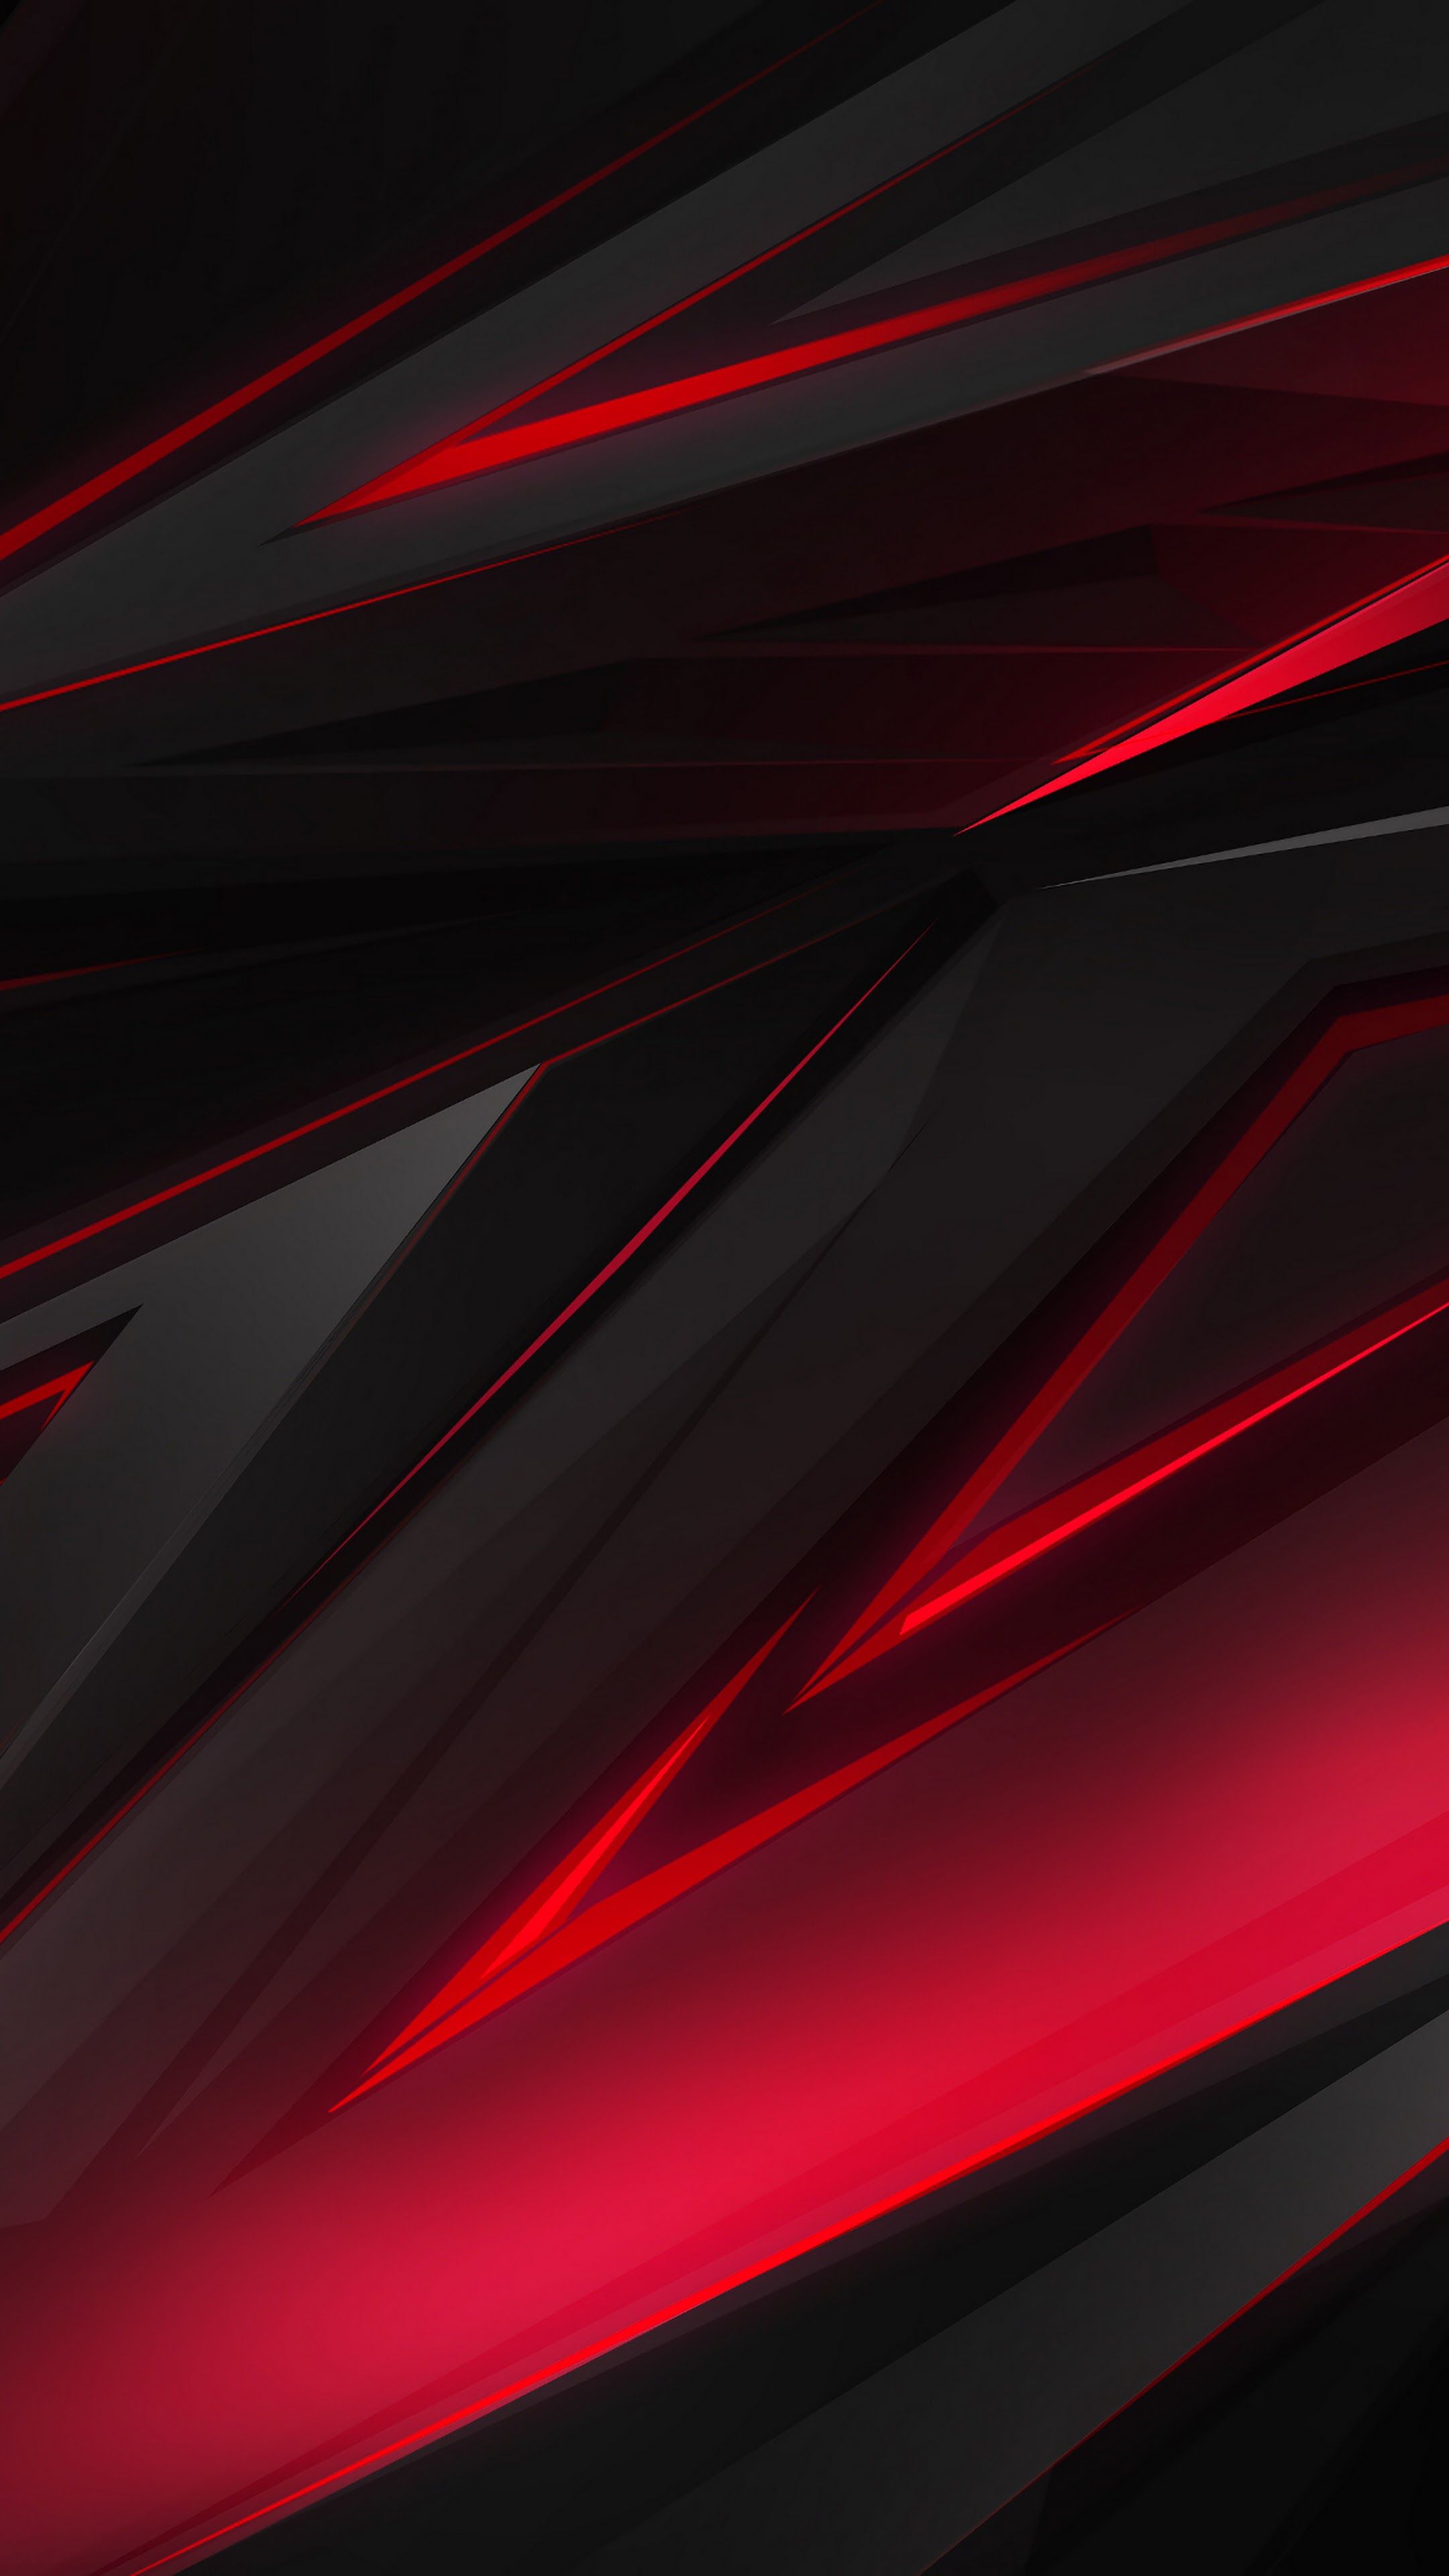 Black and Red 4K Phone Wallpaper Free Black and Red 4K Phone Background